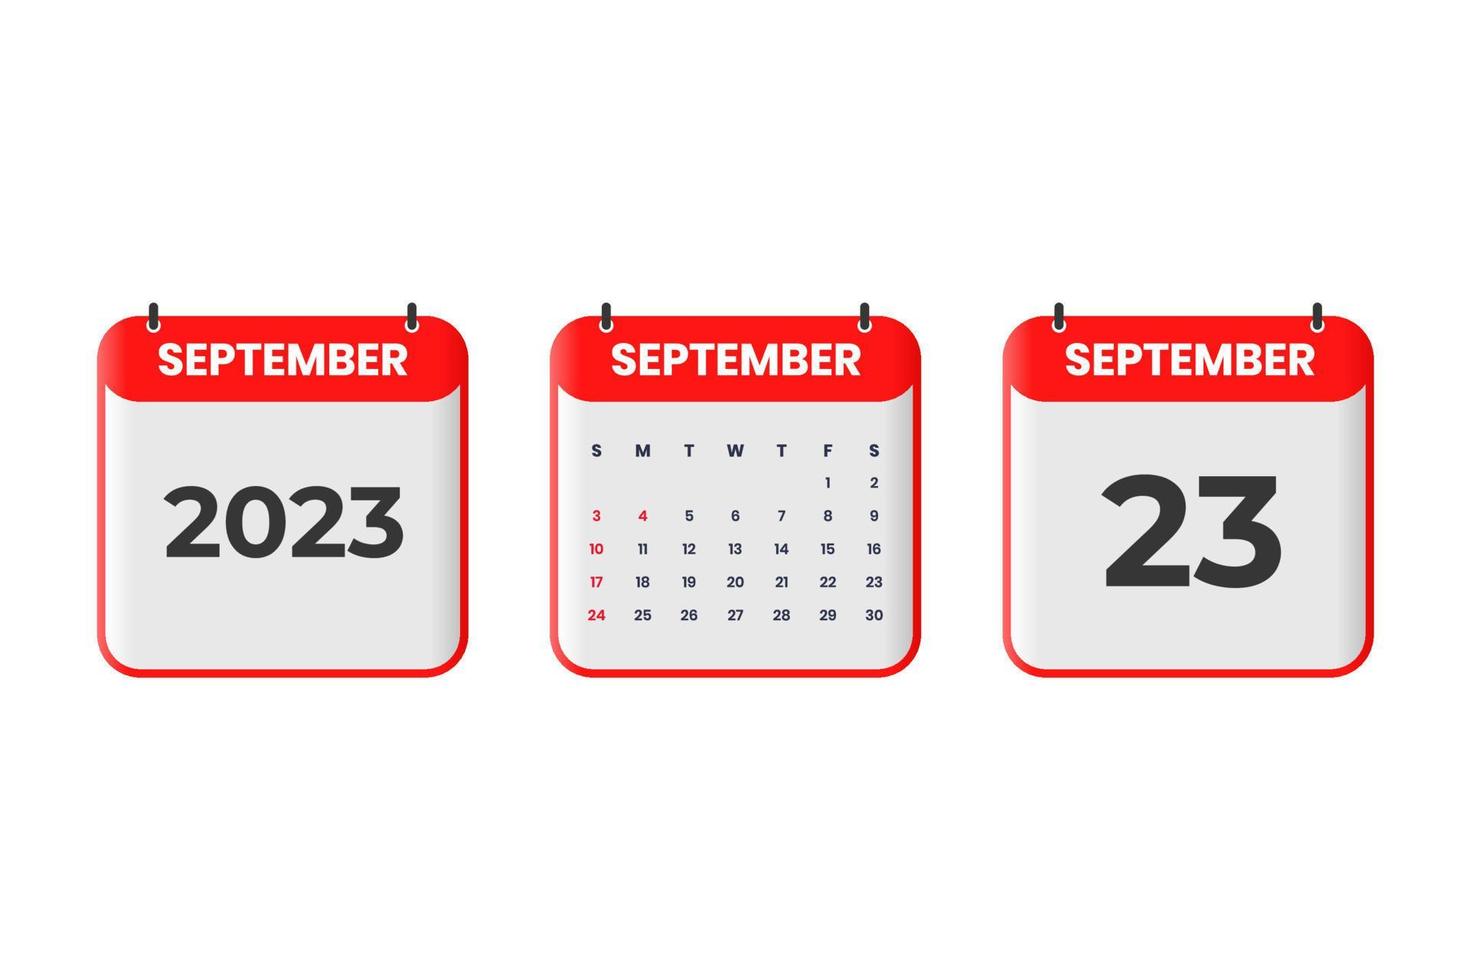 September 2023 calendar design. 23rd September 2023 calendar icon for schedule, appointment, important date concept vector